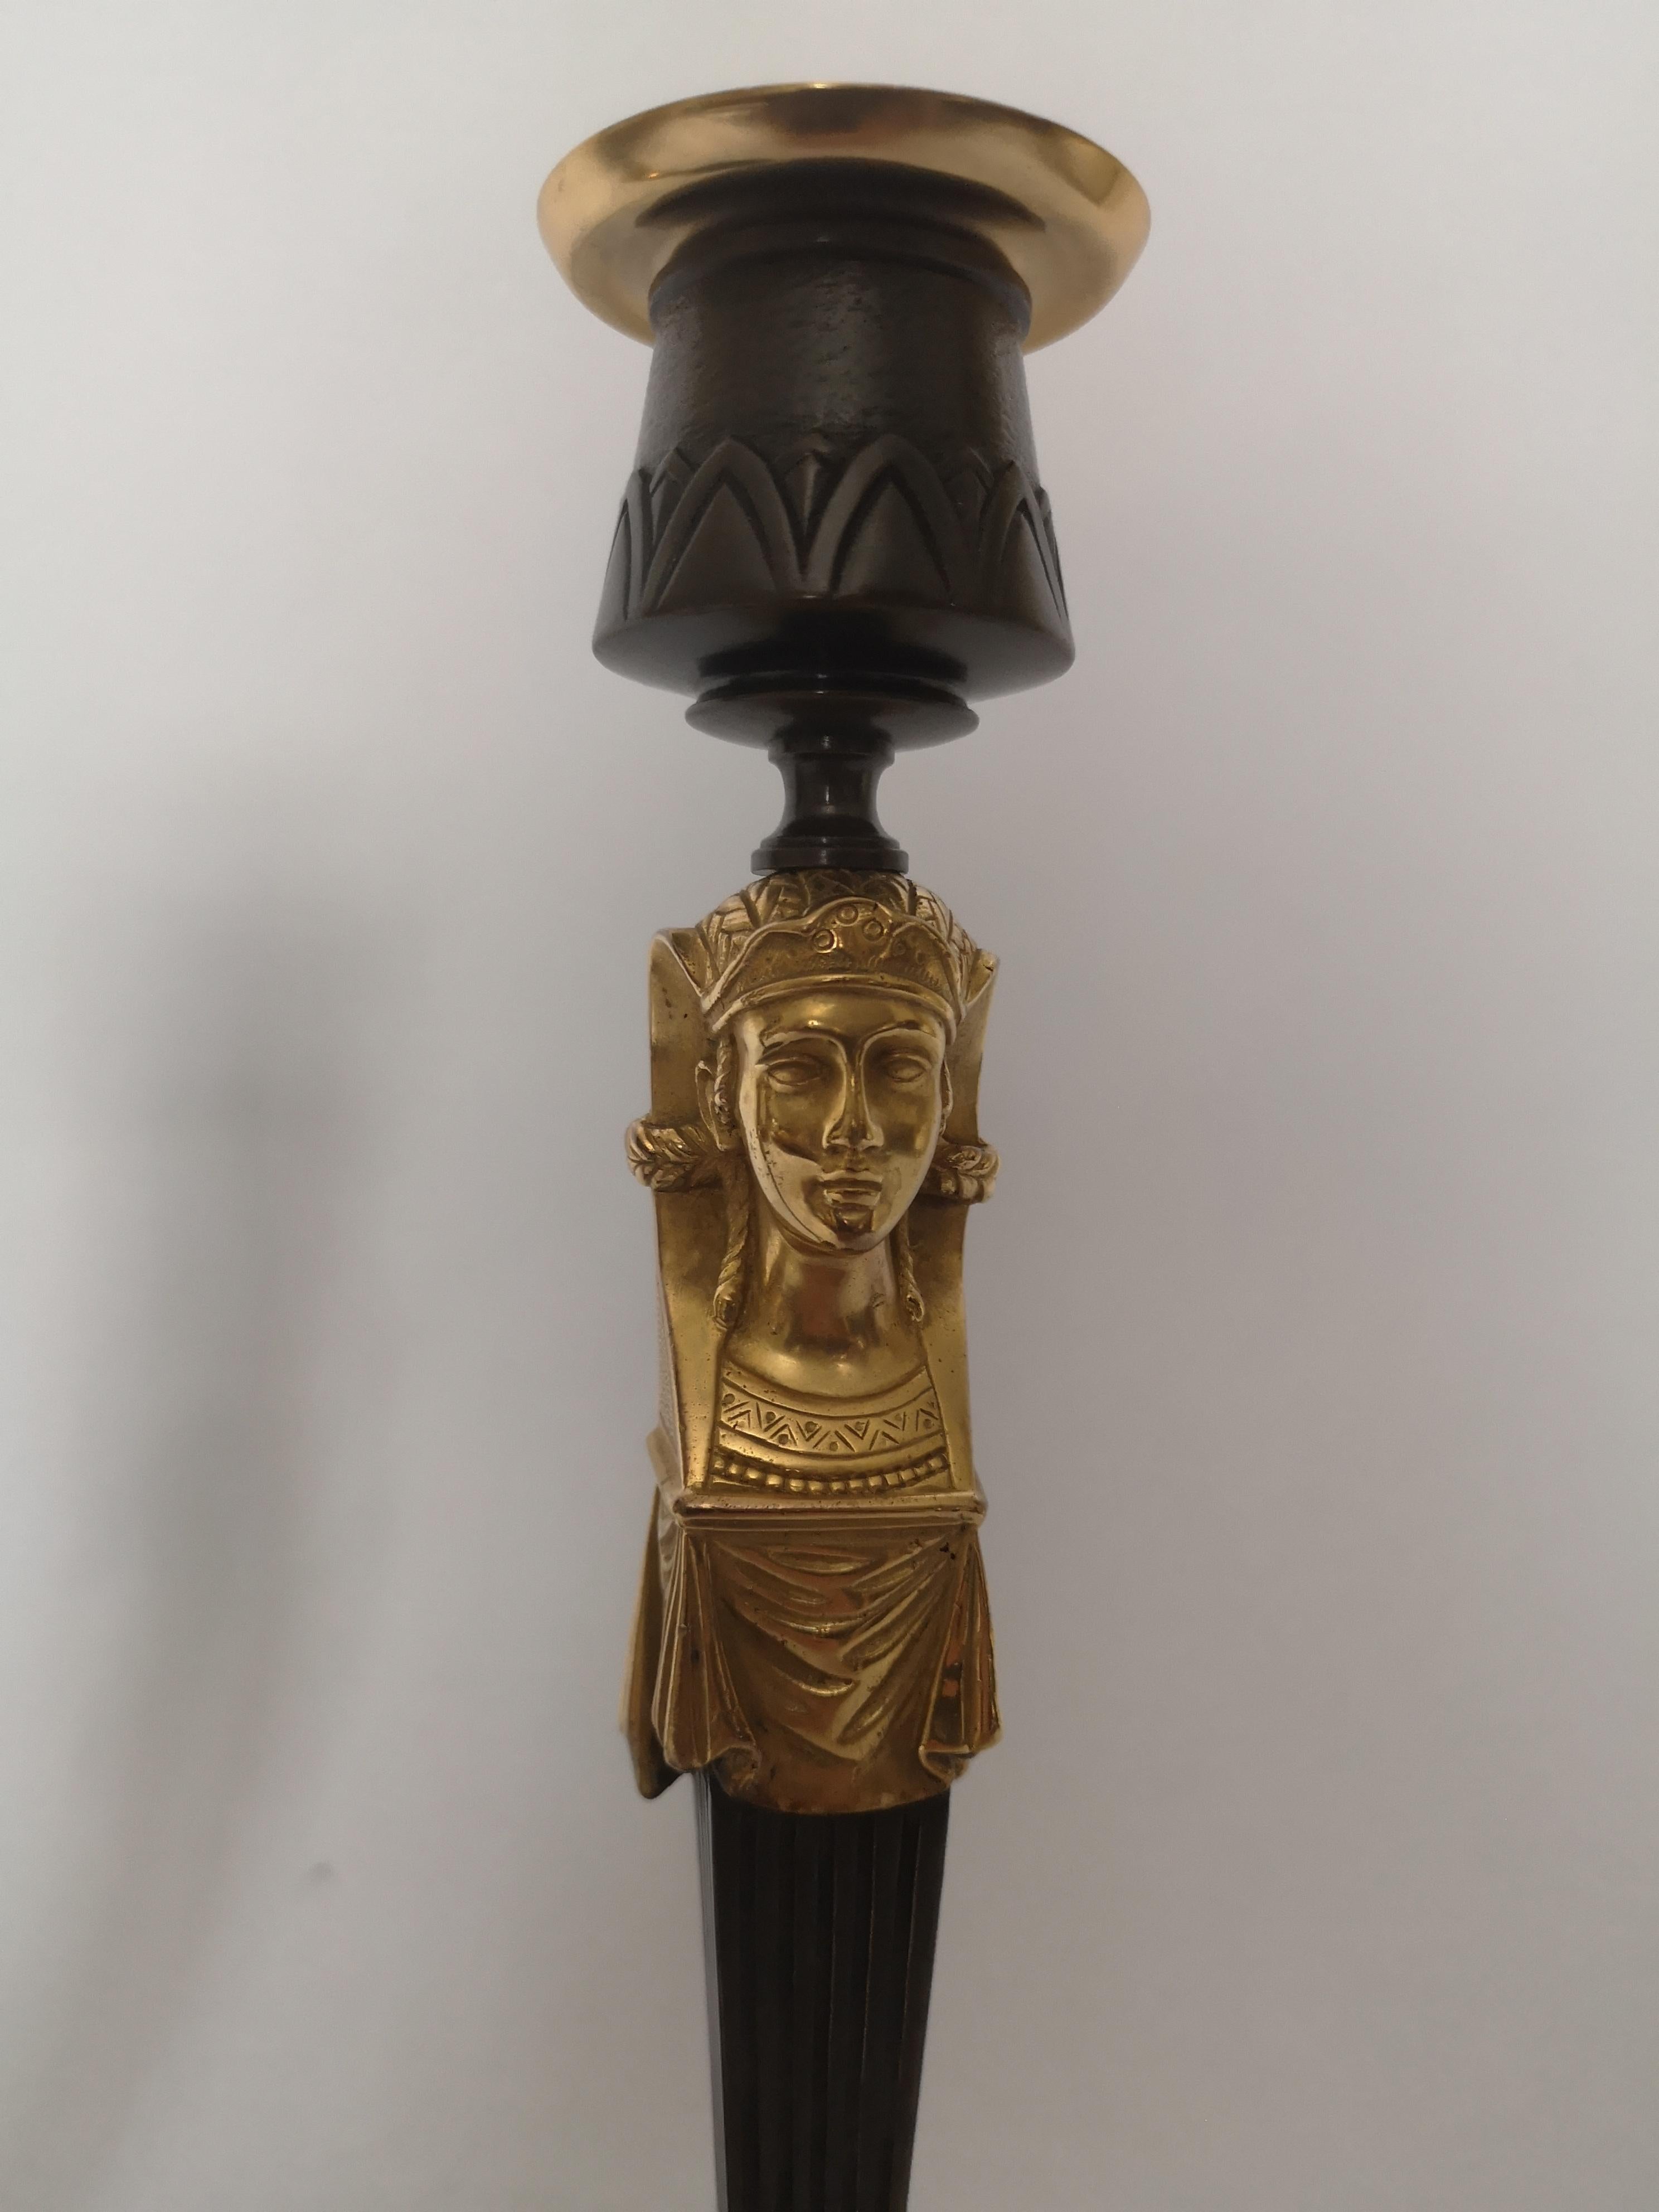 A pair of early 20th century candlesticks in the Egyptian taste. Each decorated a gilt pharaoh's head below the sconces and leaf decoration to the base,
French, circa 1920.